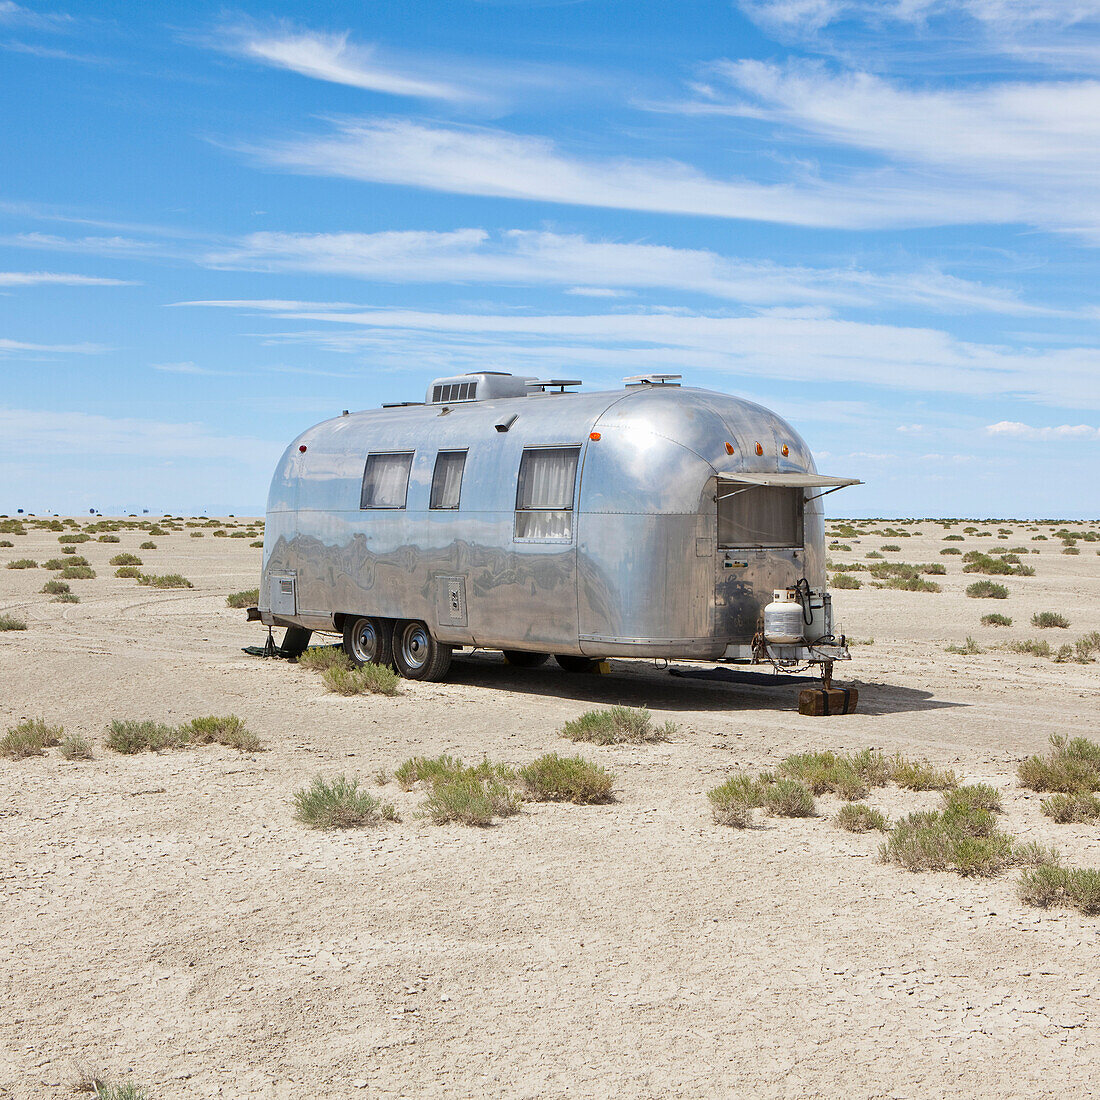 Vintage Airstream trailer on Bonneville Salt Flats, photographed during Speed Week, an annual amateur auto racing event in Utah, USA. Caravan, silver exterior., Vintage Airstream trailer in desert